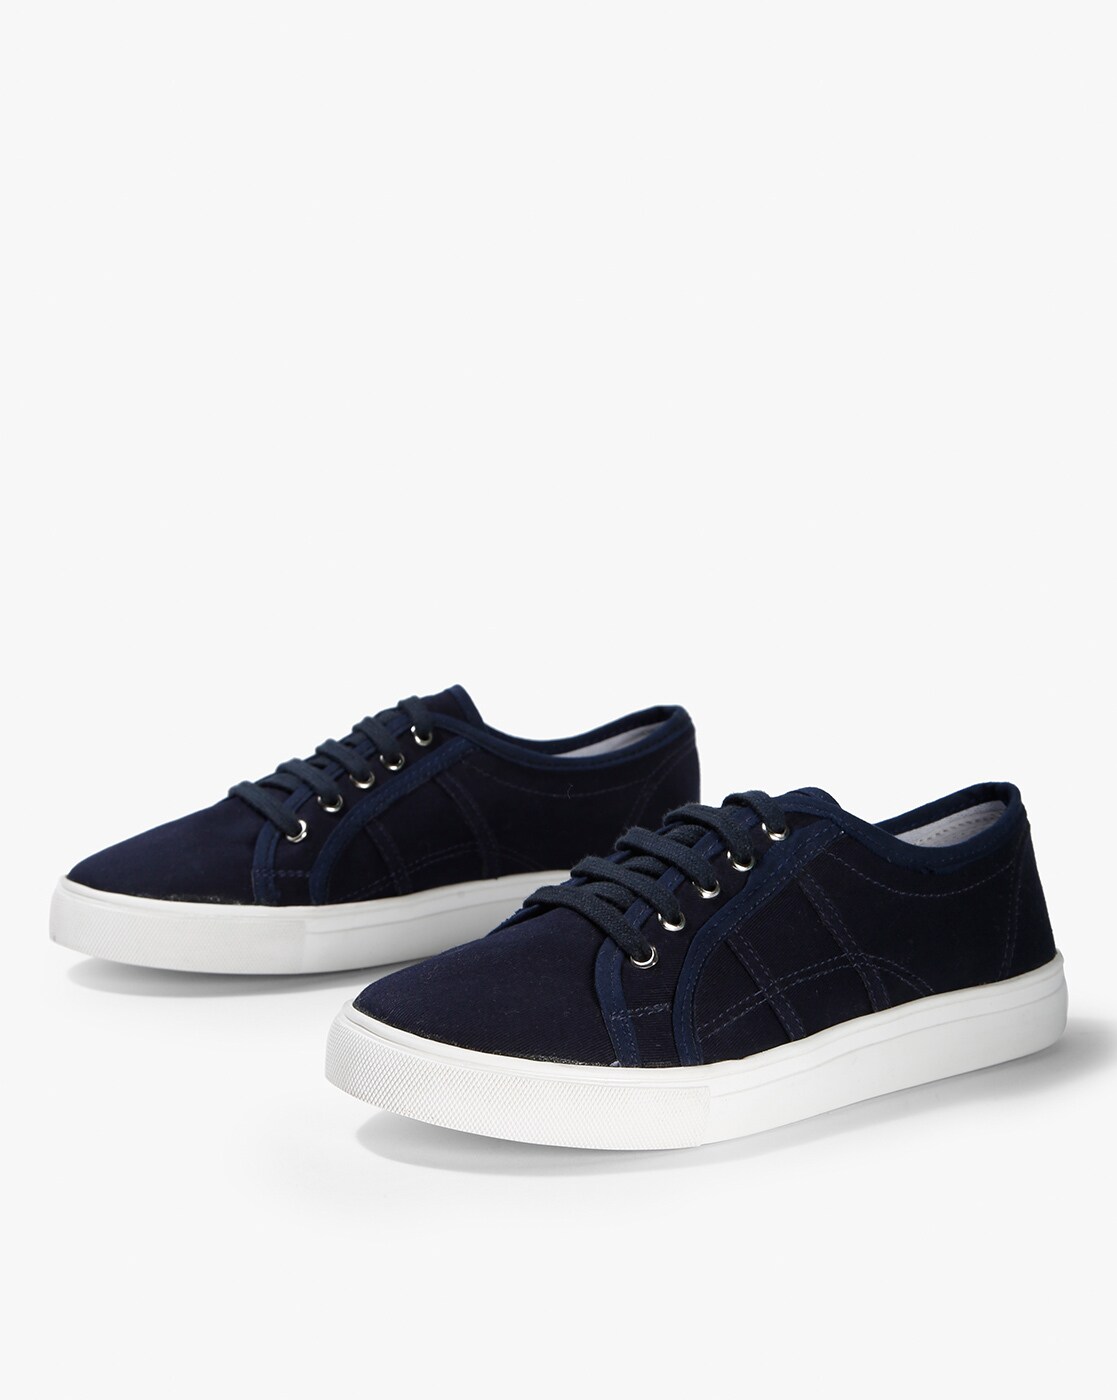 navy blue casual shoes womens